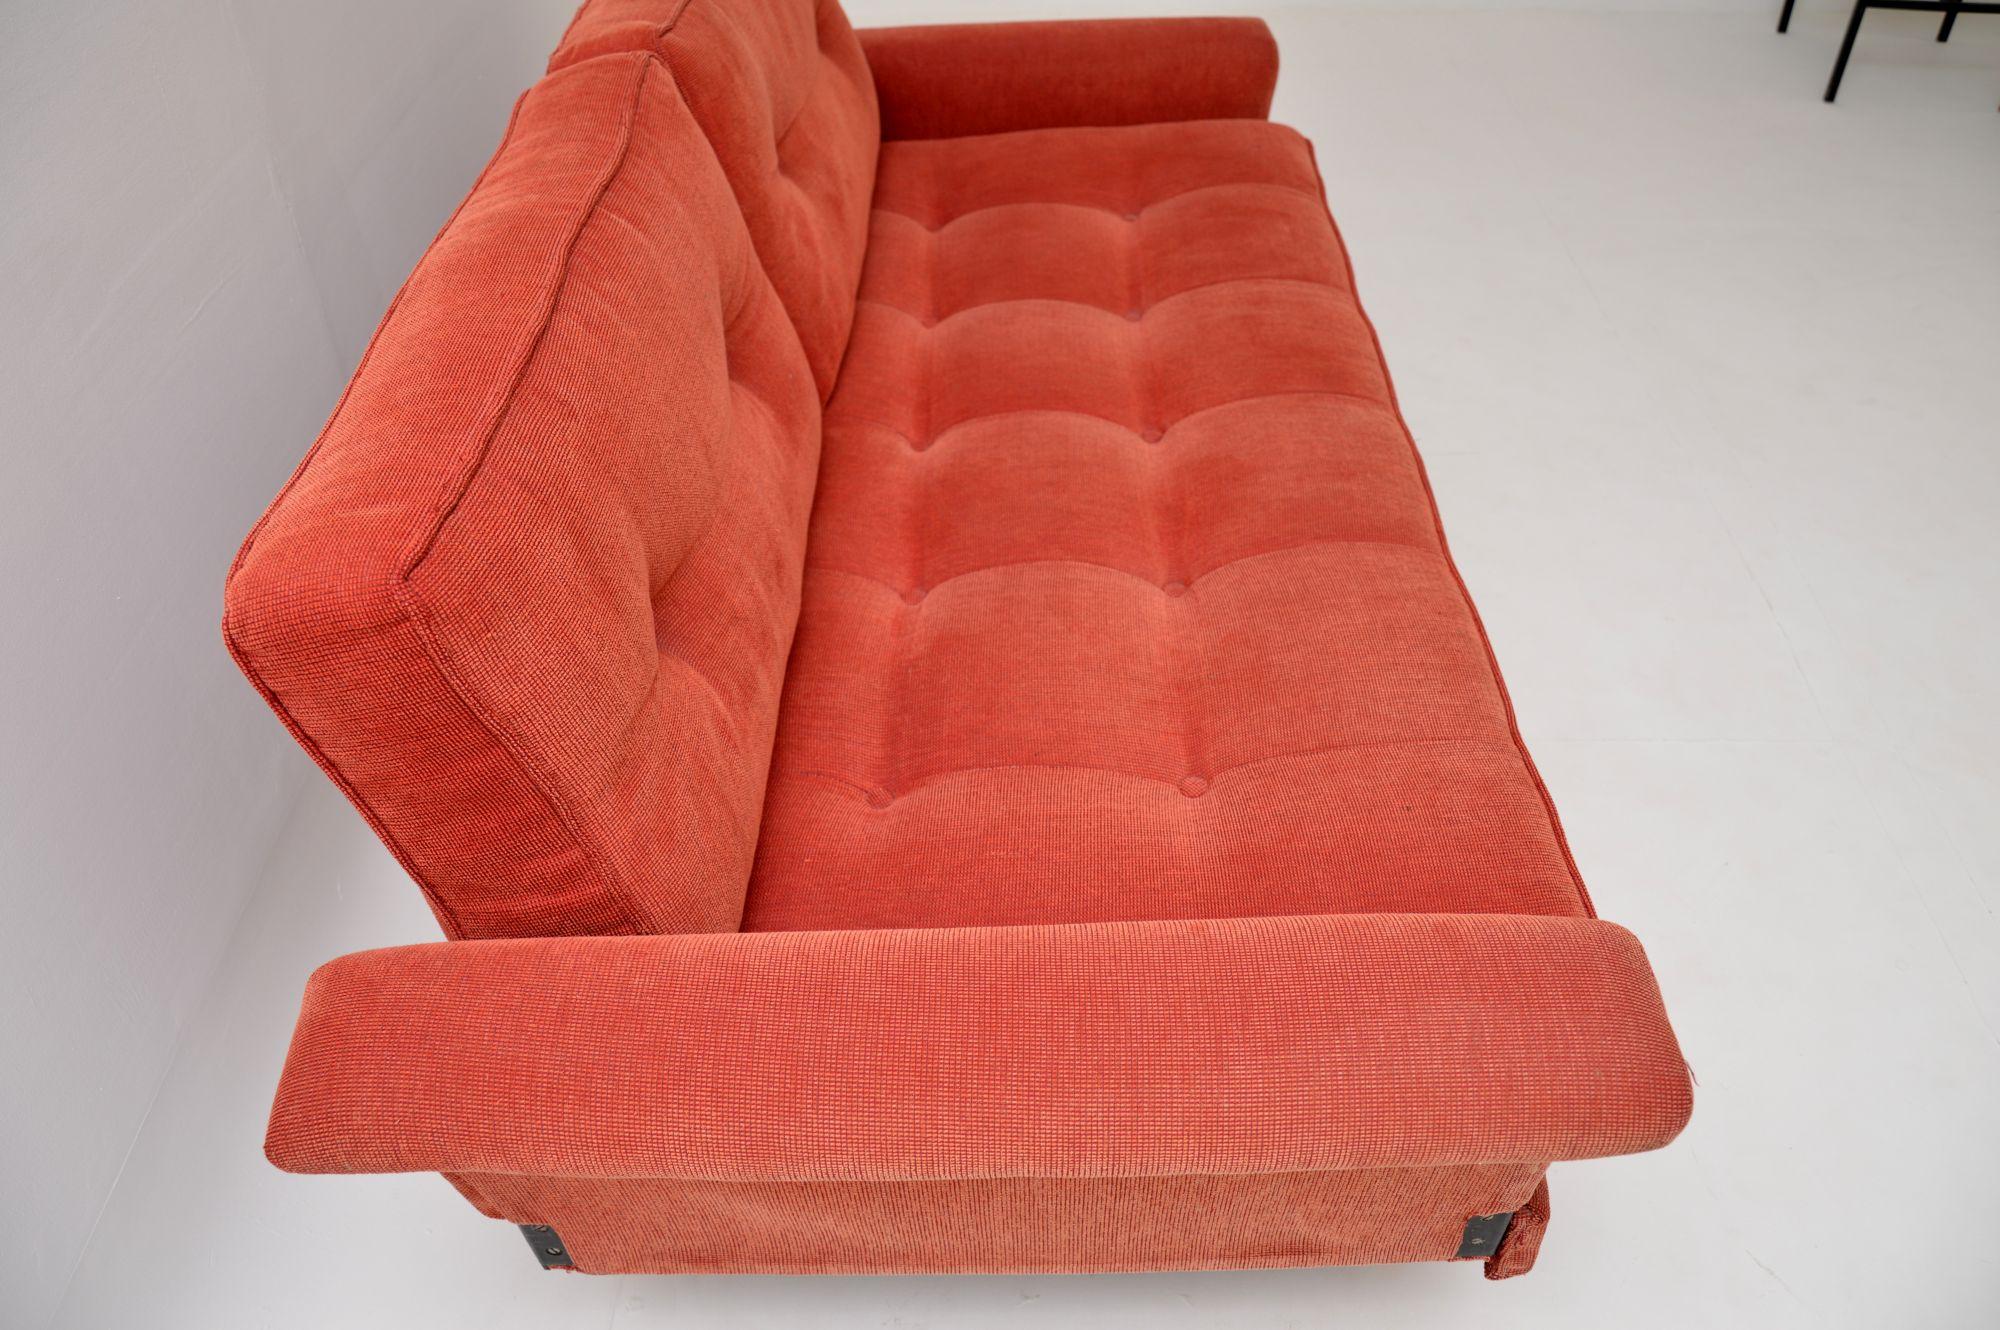 Fabric 1950s Vintage Sofa Bed